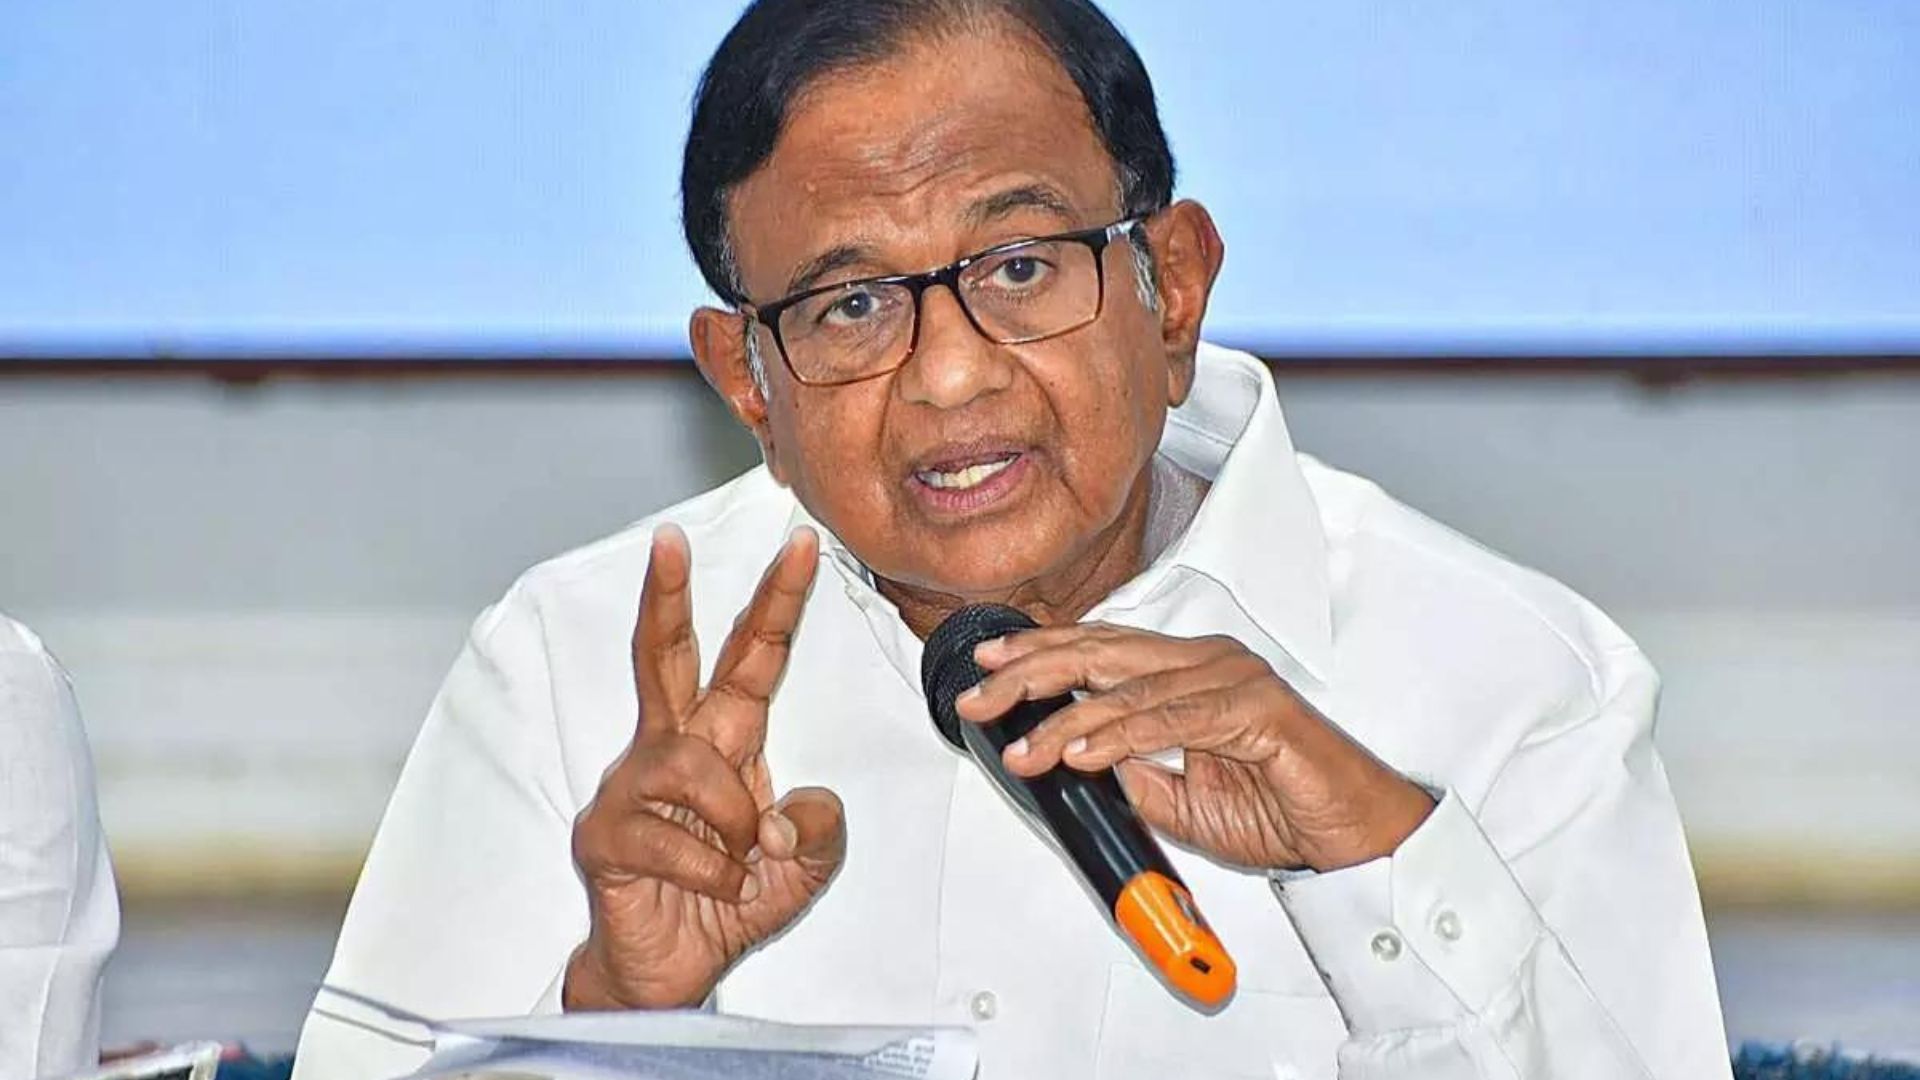 “Govt Needs To Give Up All-India Examination”: P Chidambaram Weighs In On Controversy Surrounding NEET-UG